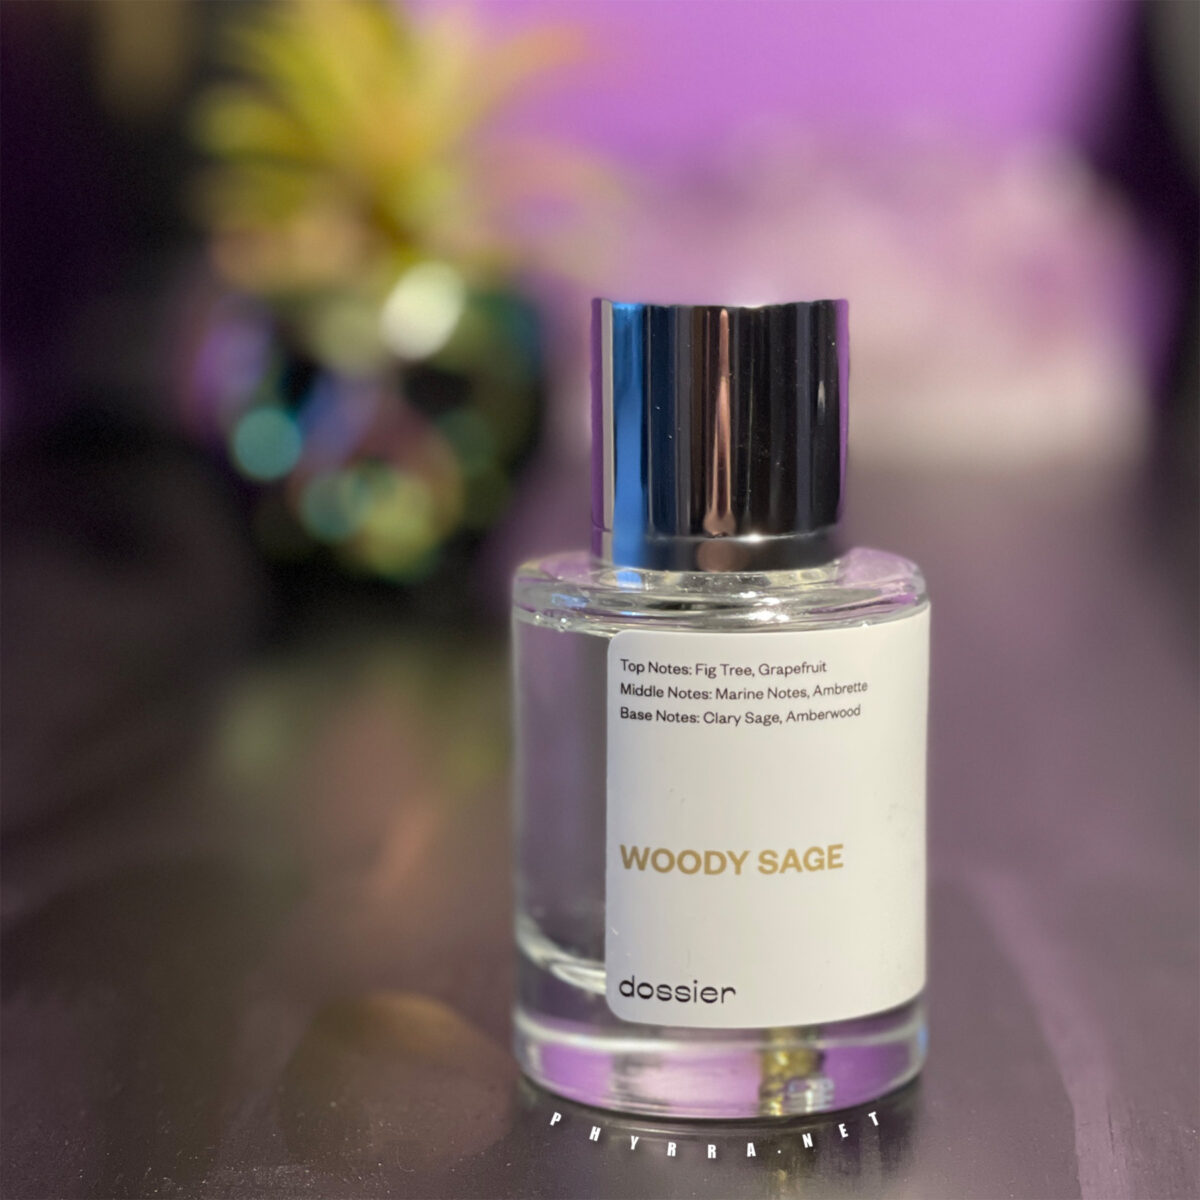 Dossier Woody Sage Perfume Review